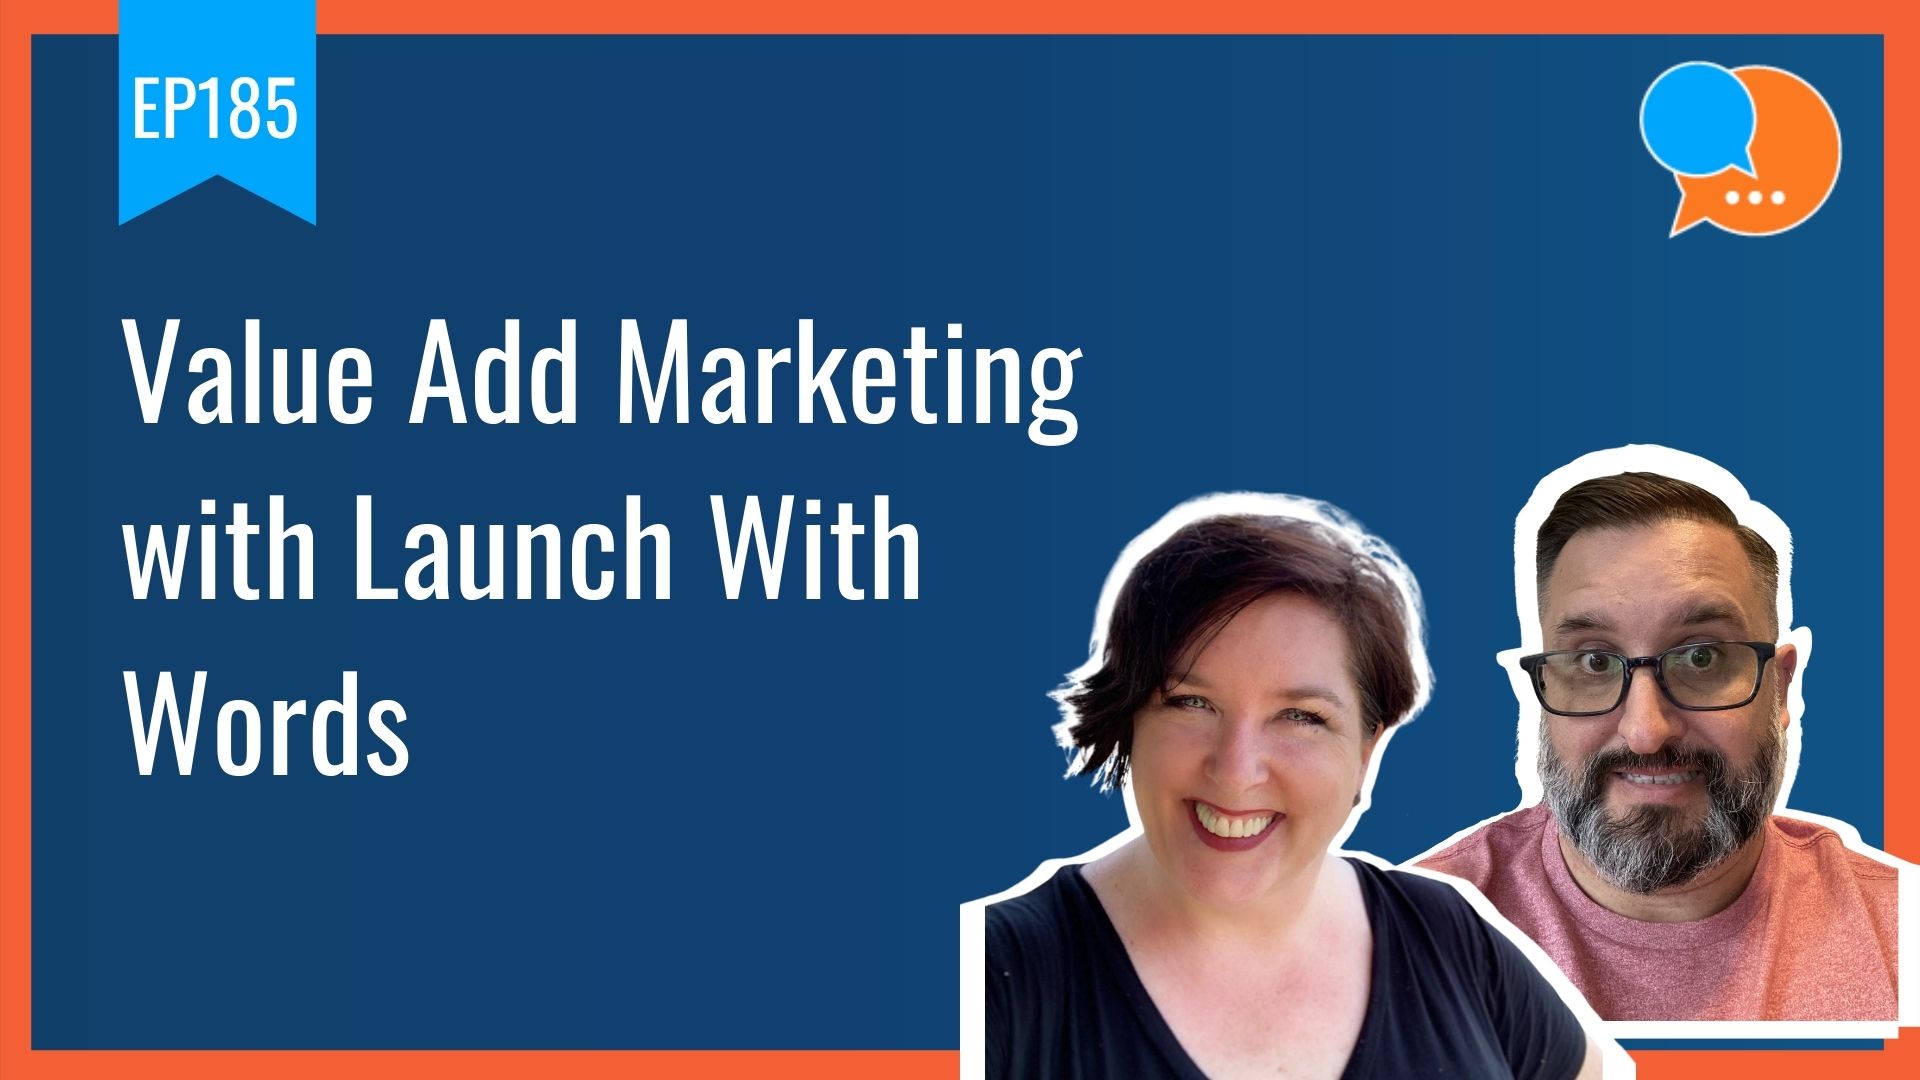 EP185 – Value Add Marketing with Launch With Words